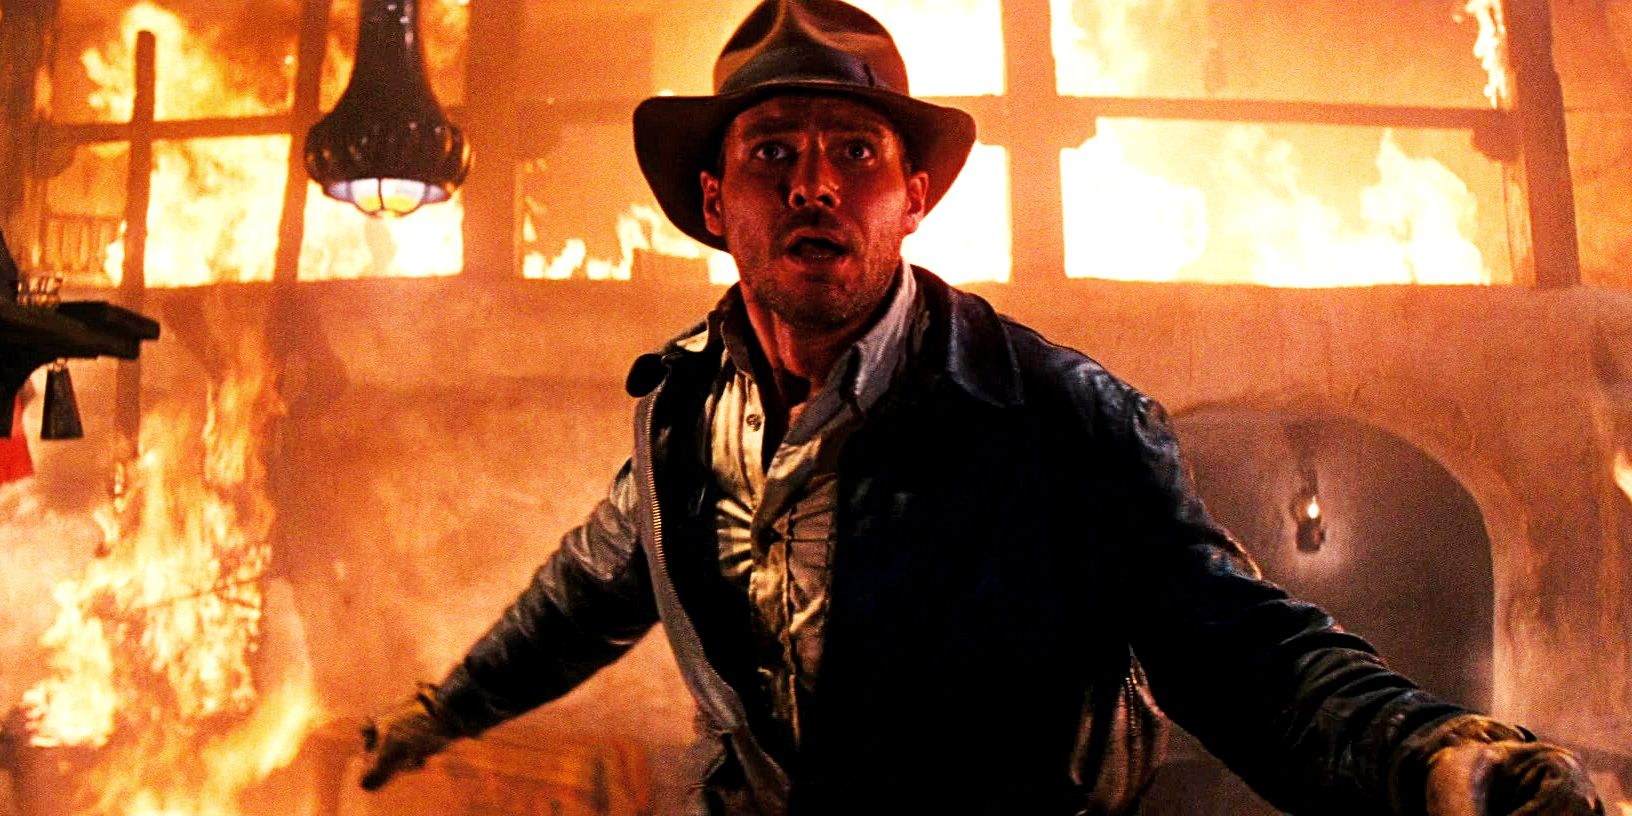 Harrison Ford as Indiana Jones standing in front of fire in Raiders of the Lost Ark